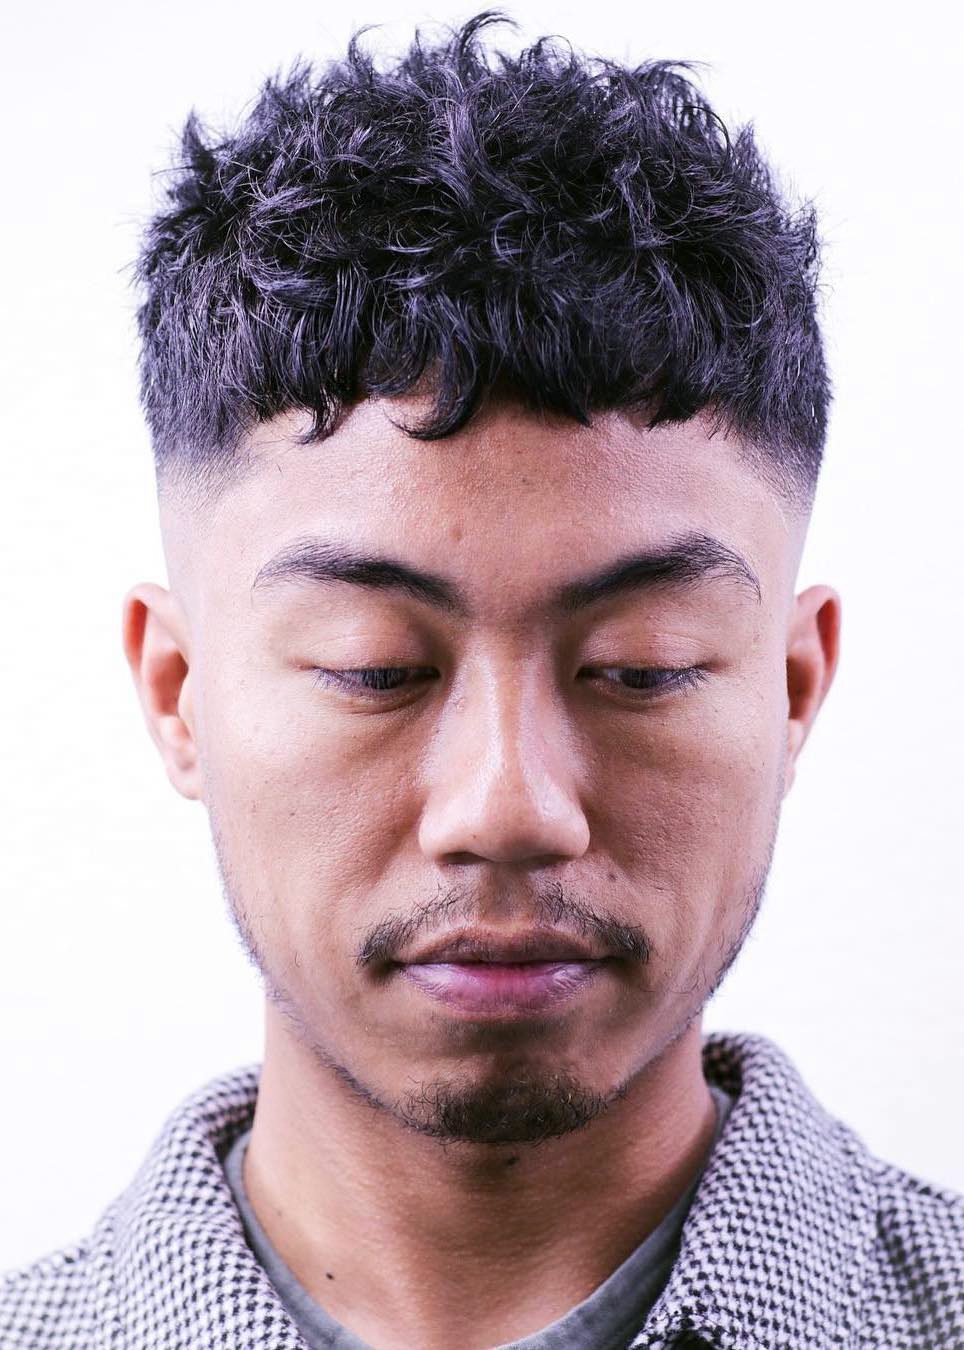 50 Popular Korean Hairstyles For Men To Copy in 2023